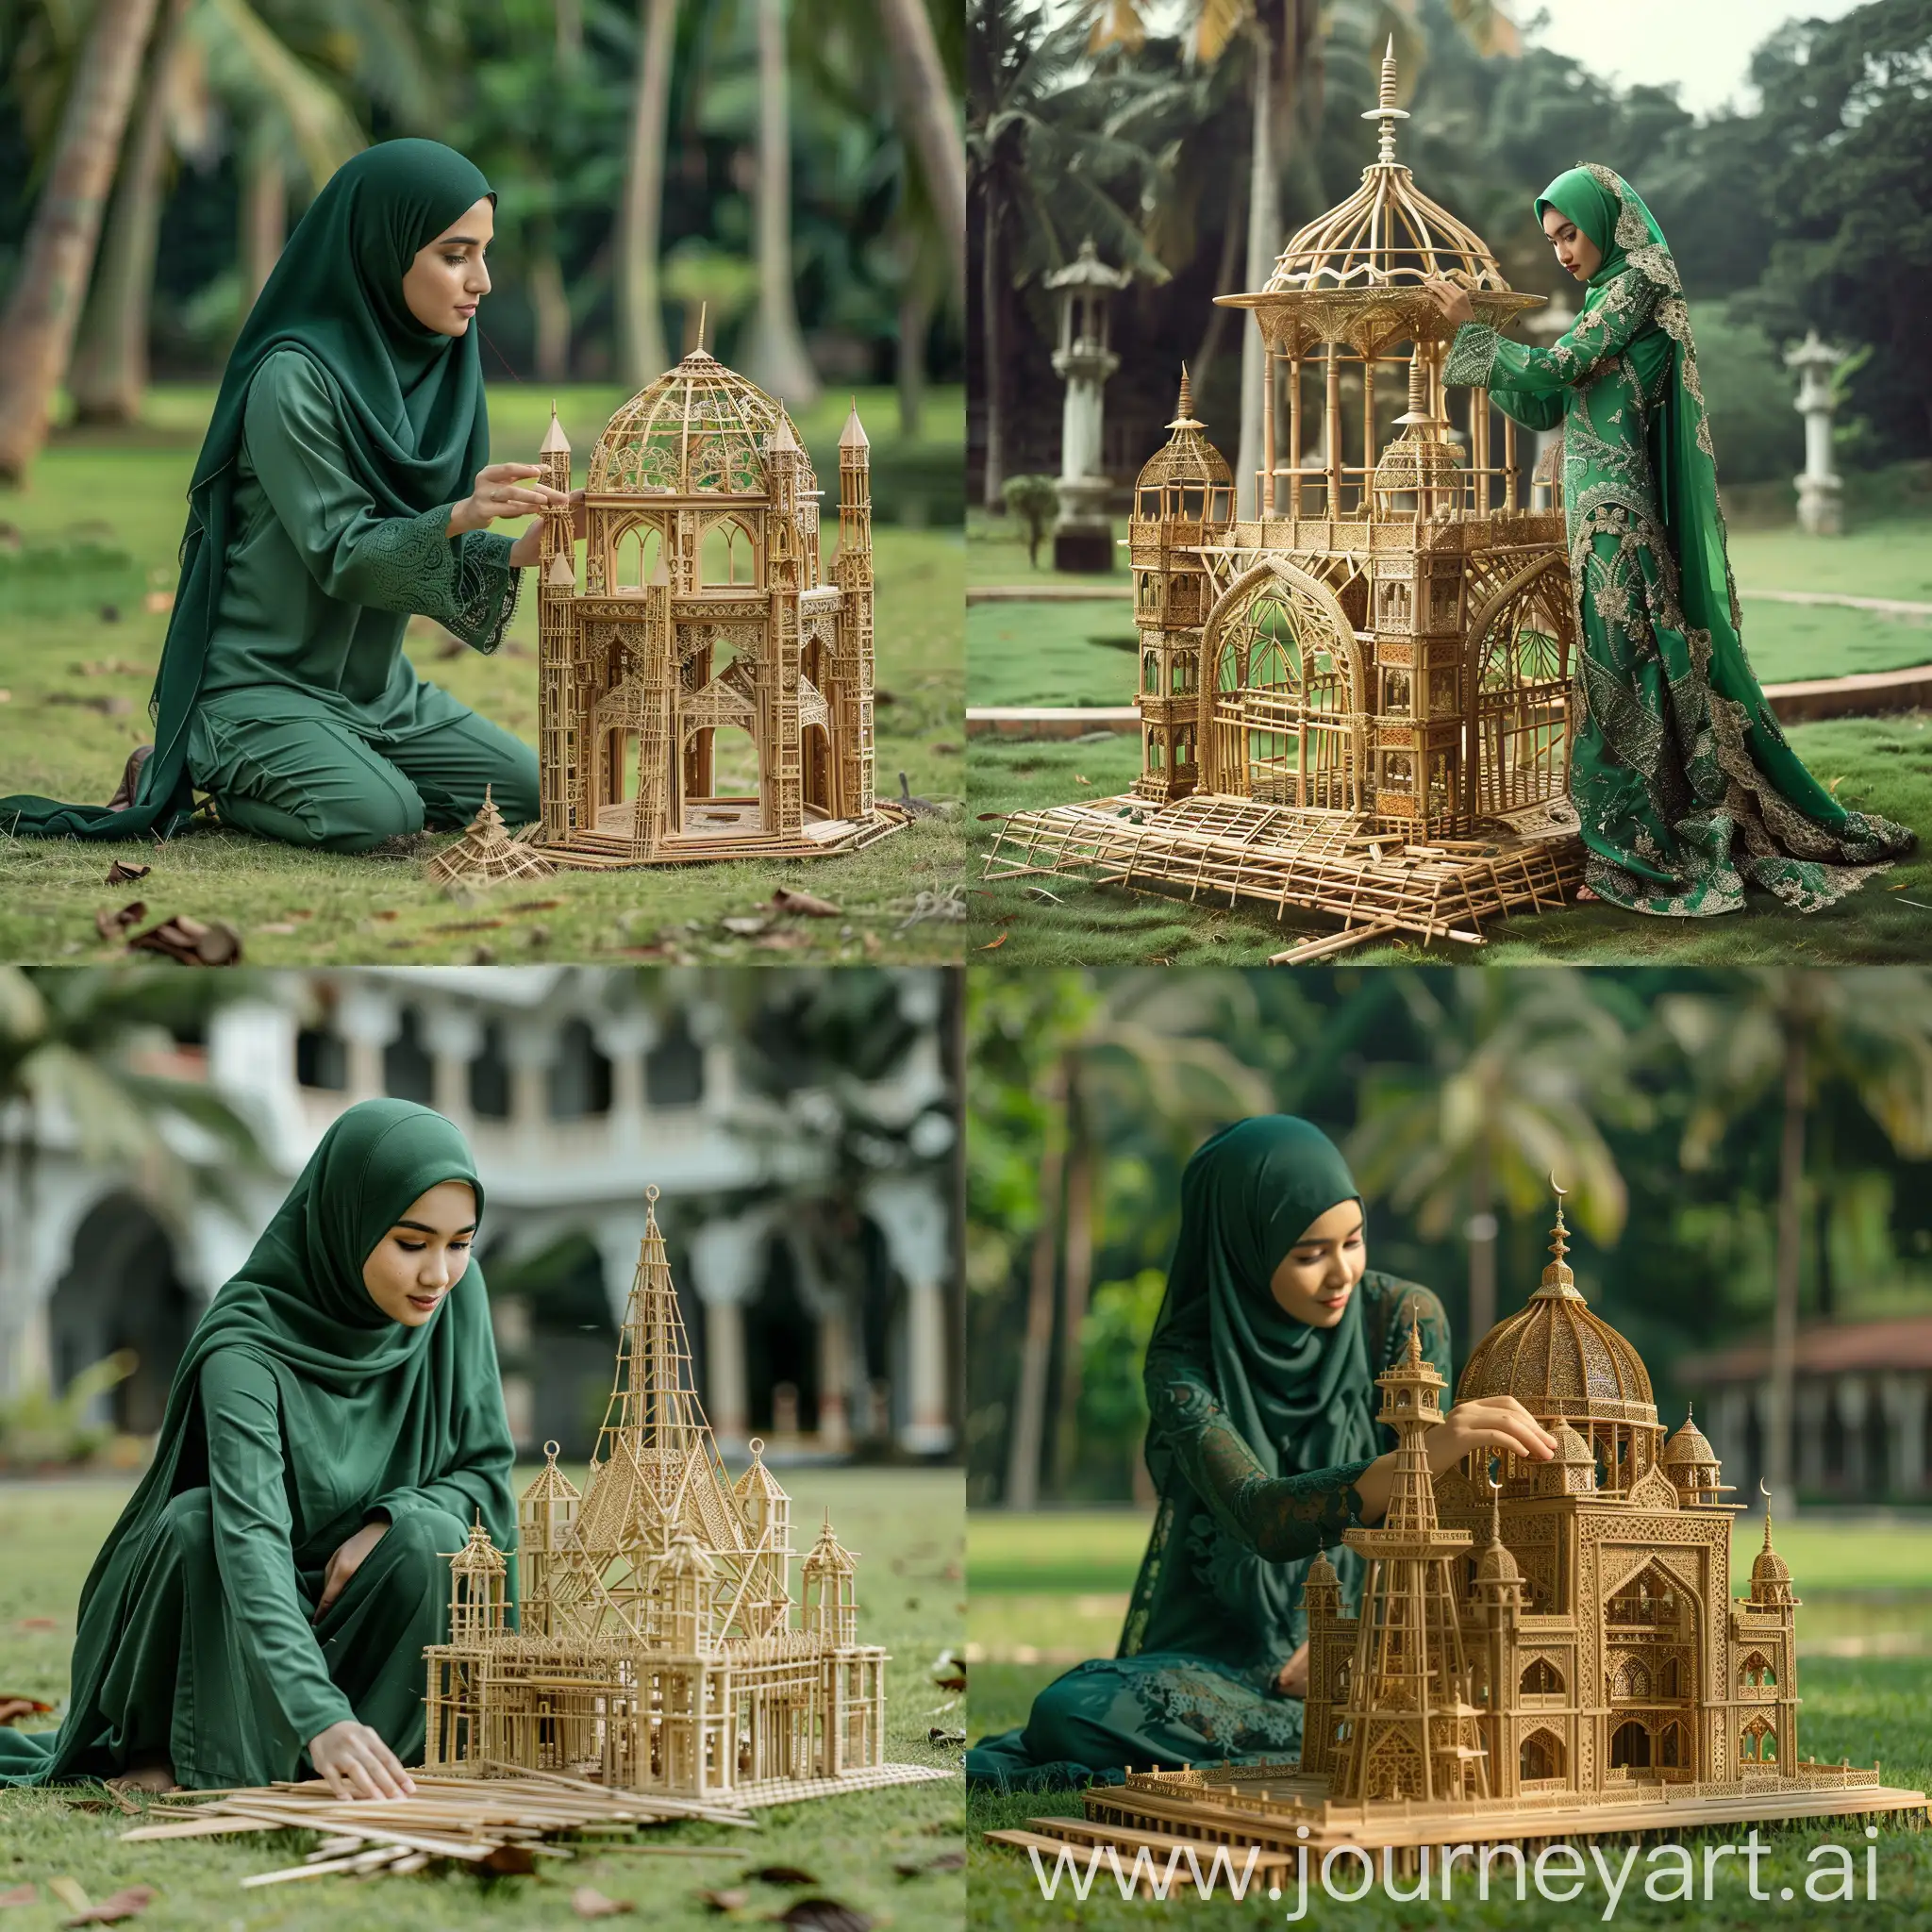 Muslim-Woman-Building-Large-Bamboo-Mosque-Miniature-on-Green-Lawn